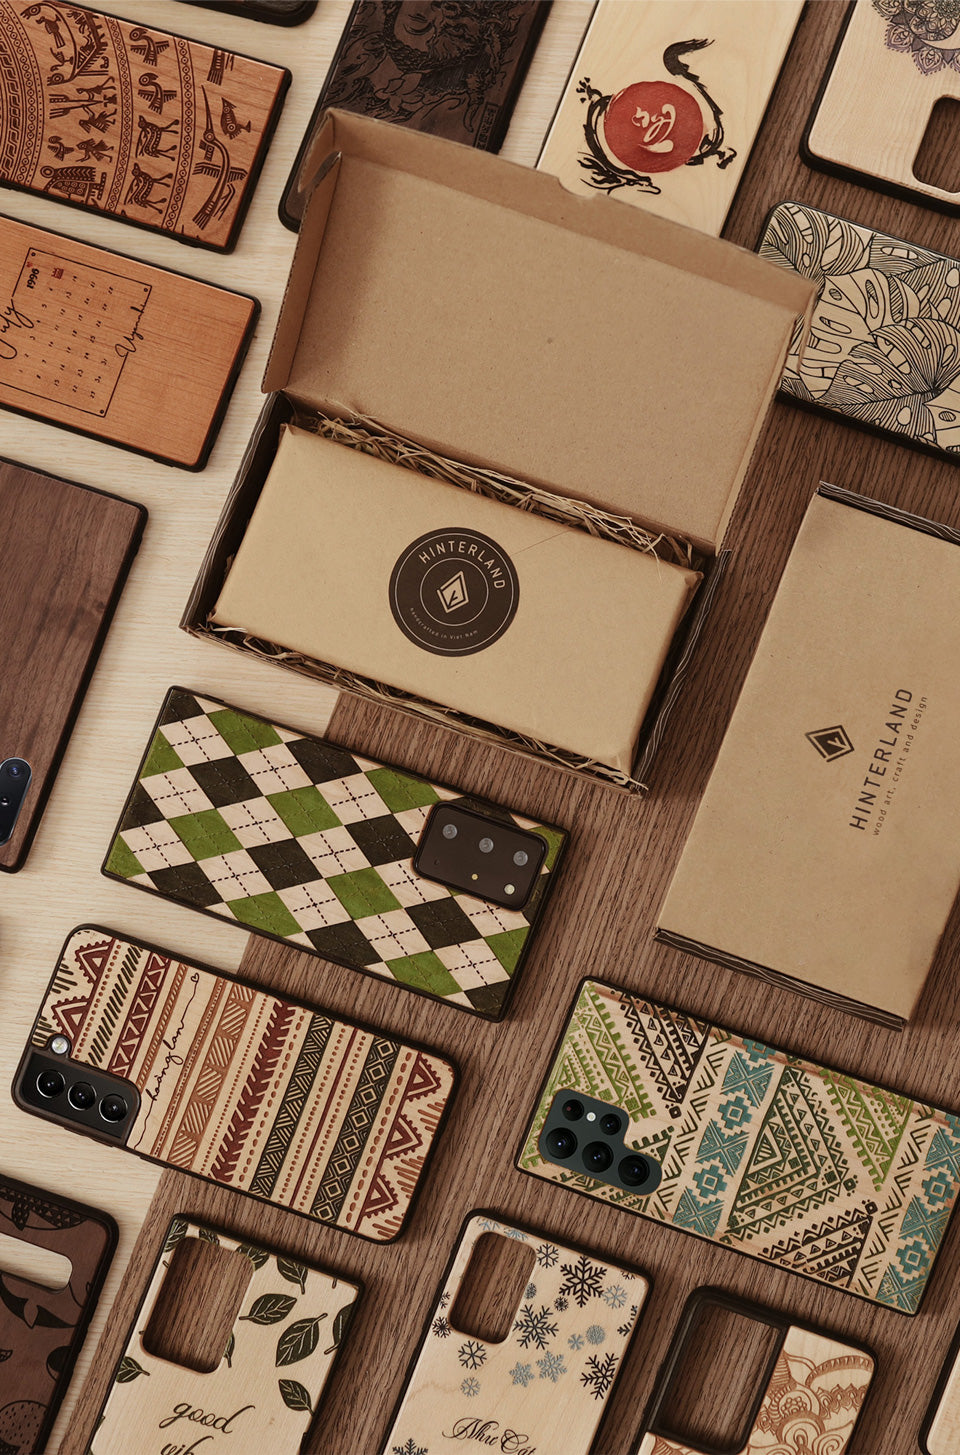 Customize wooden iPhone and Samsung cases with attractive design from Hinterland Craft